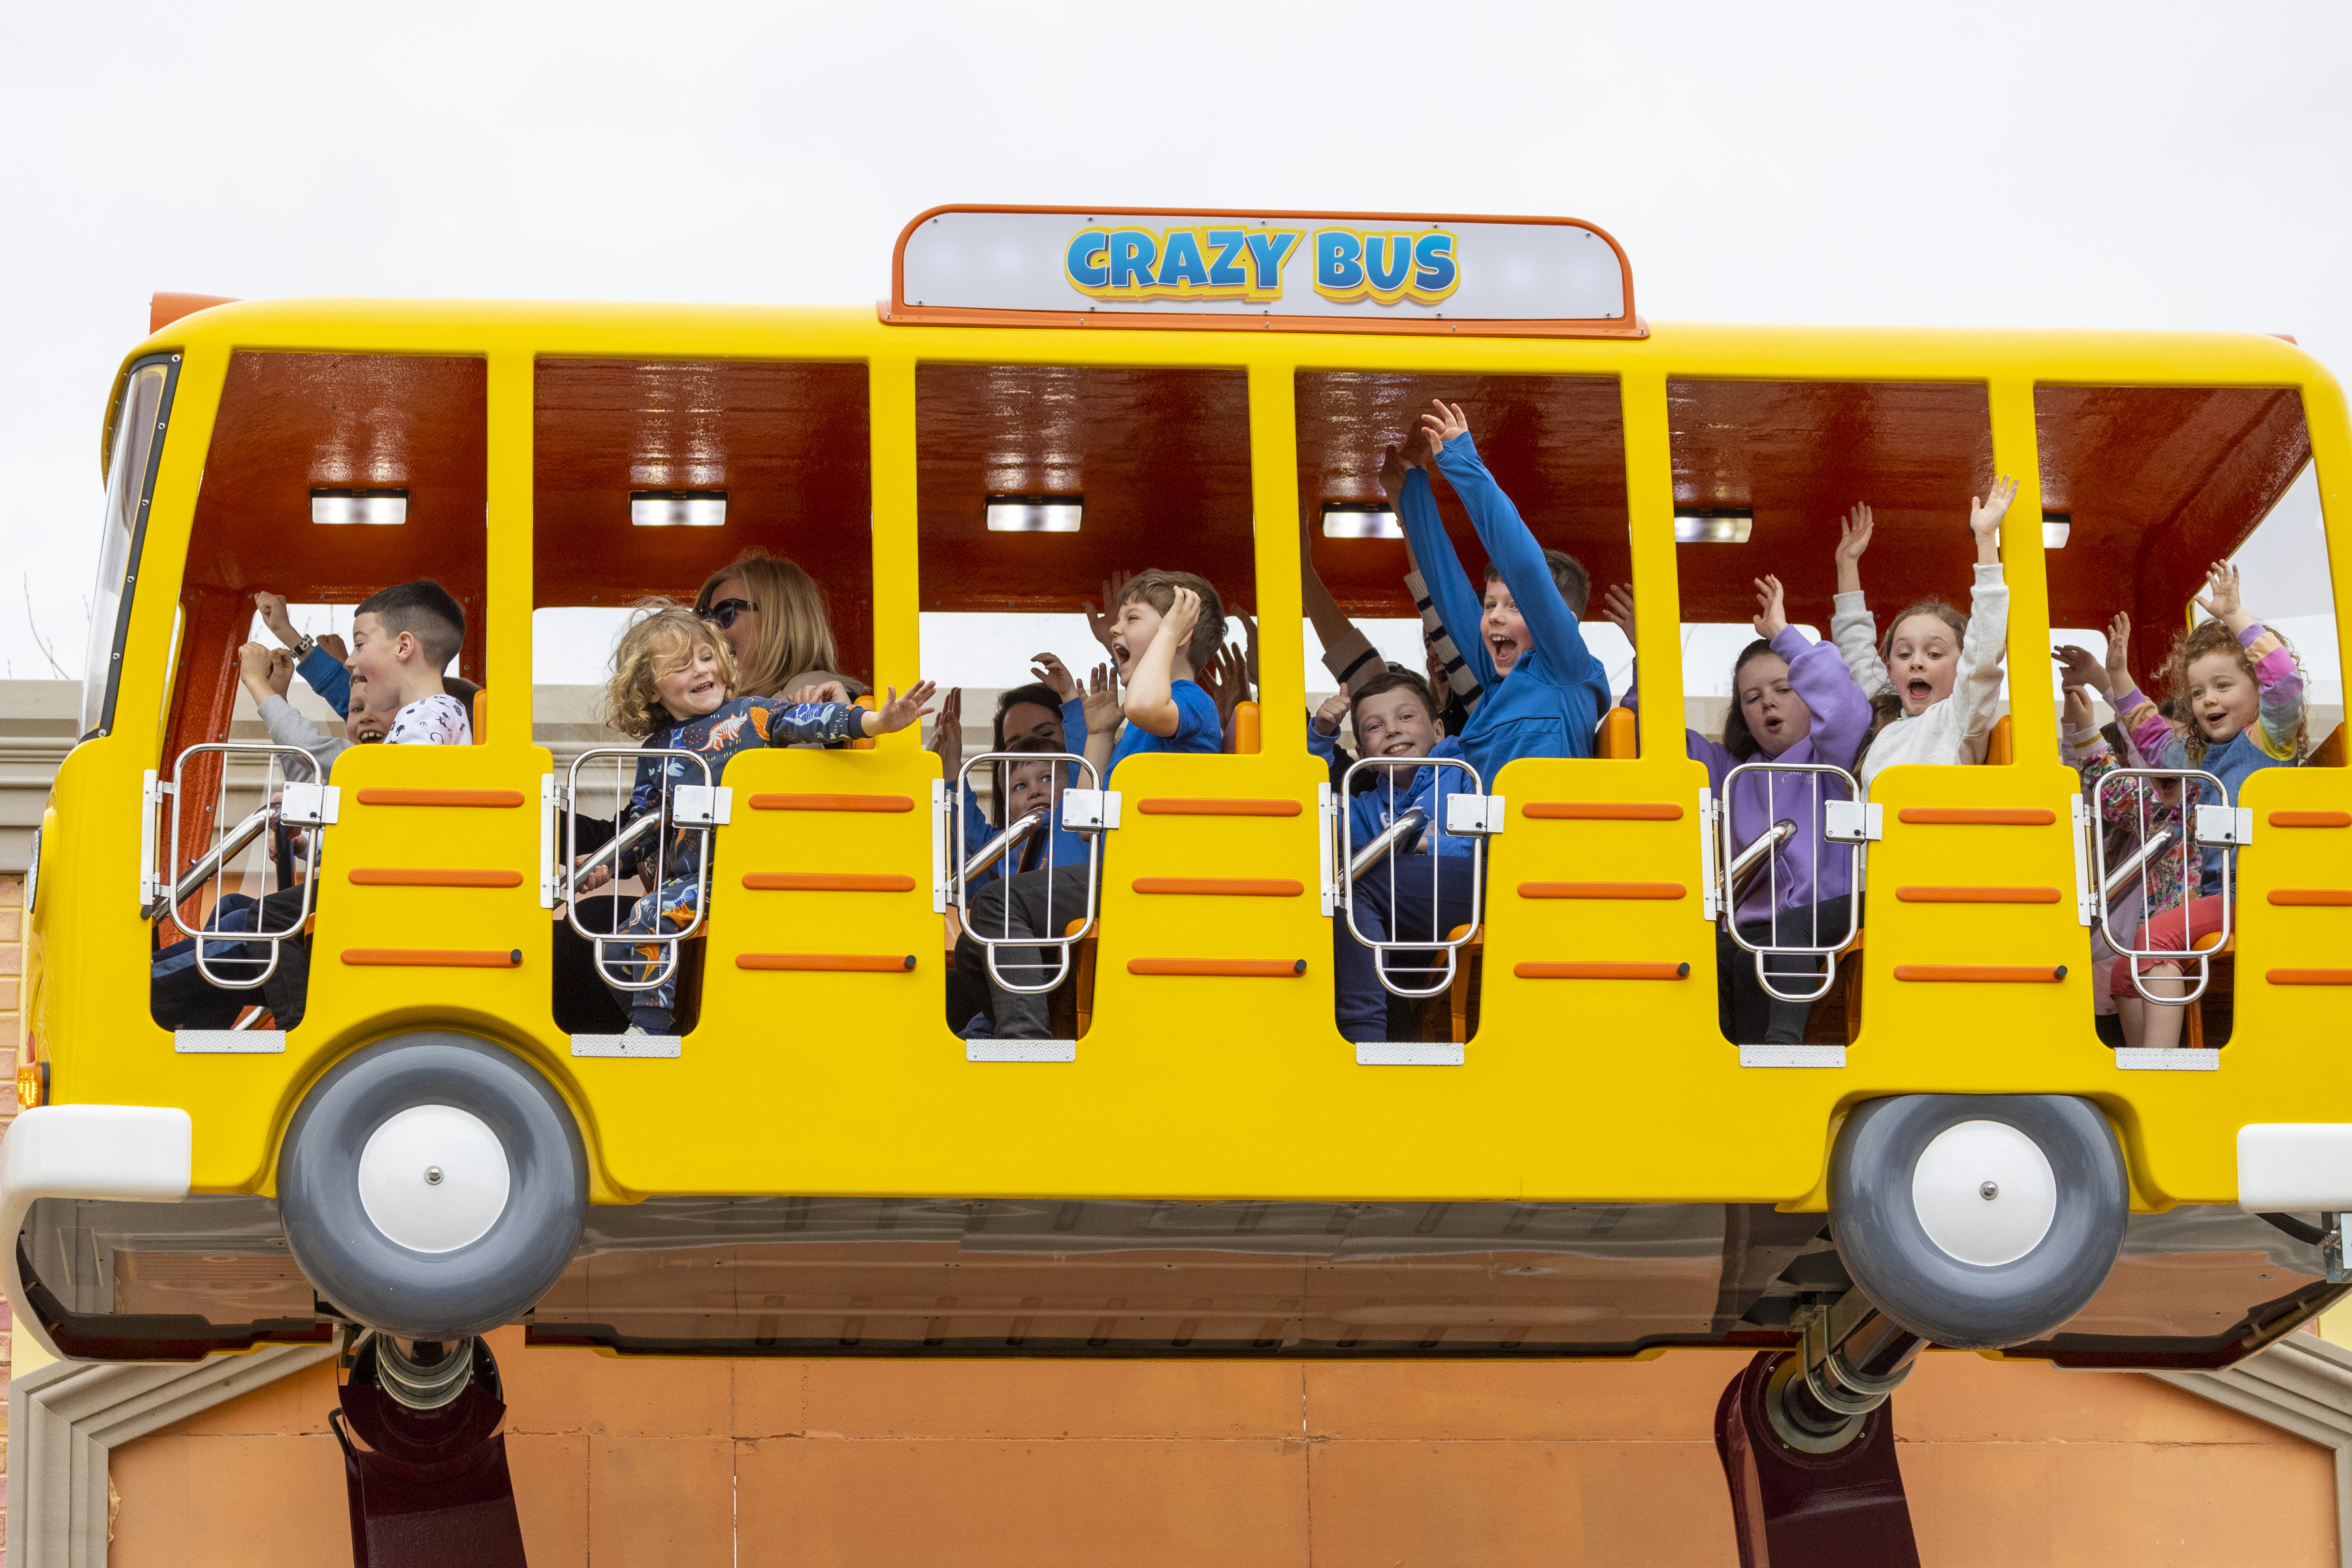 All aboard the Crazy Bus!